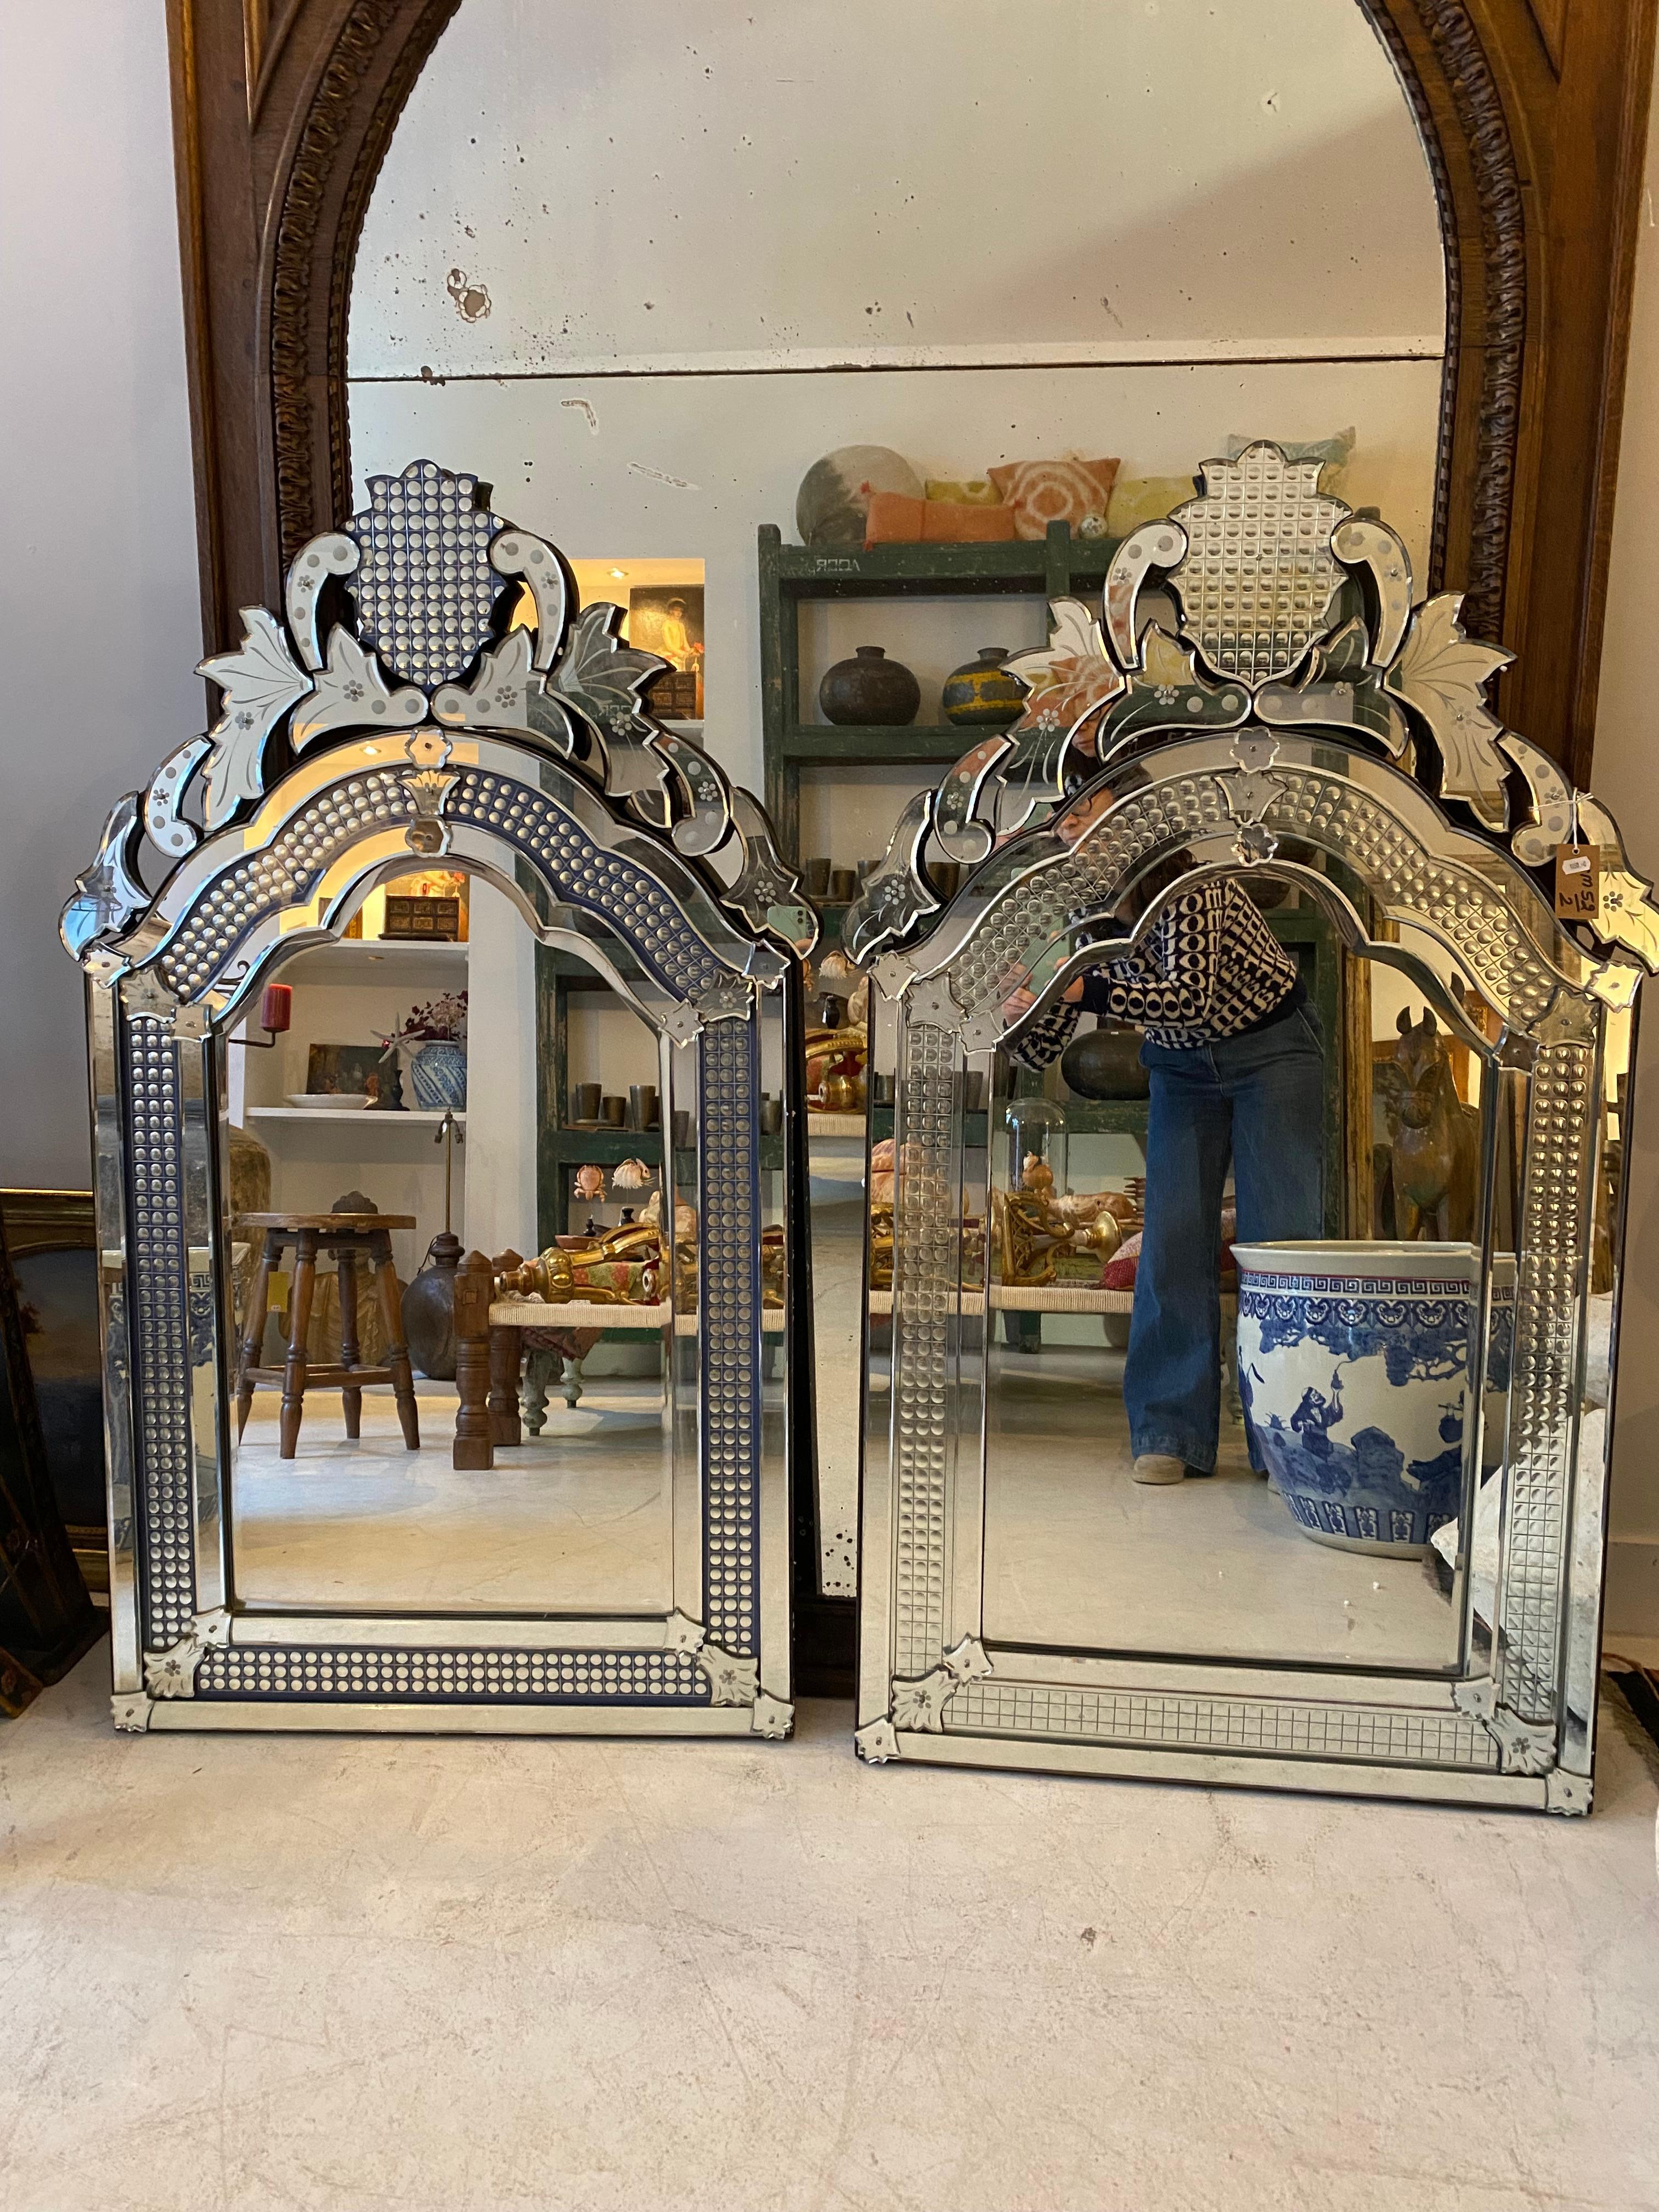 Two Venitian style mirrors forming a pair
Delightful geometric patterns 
